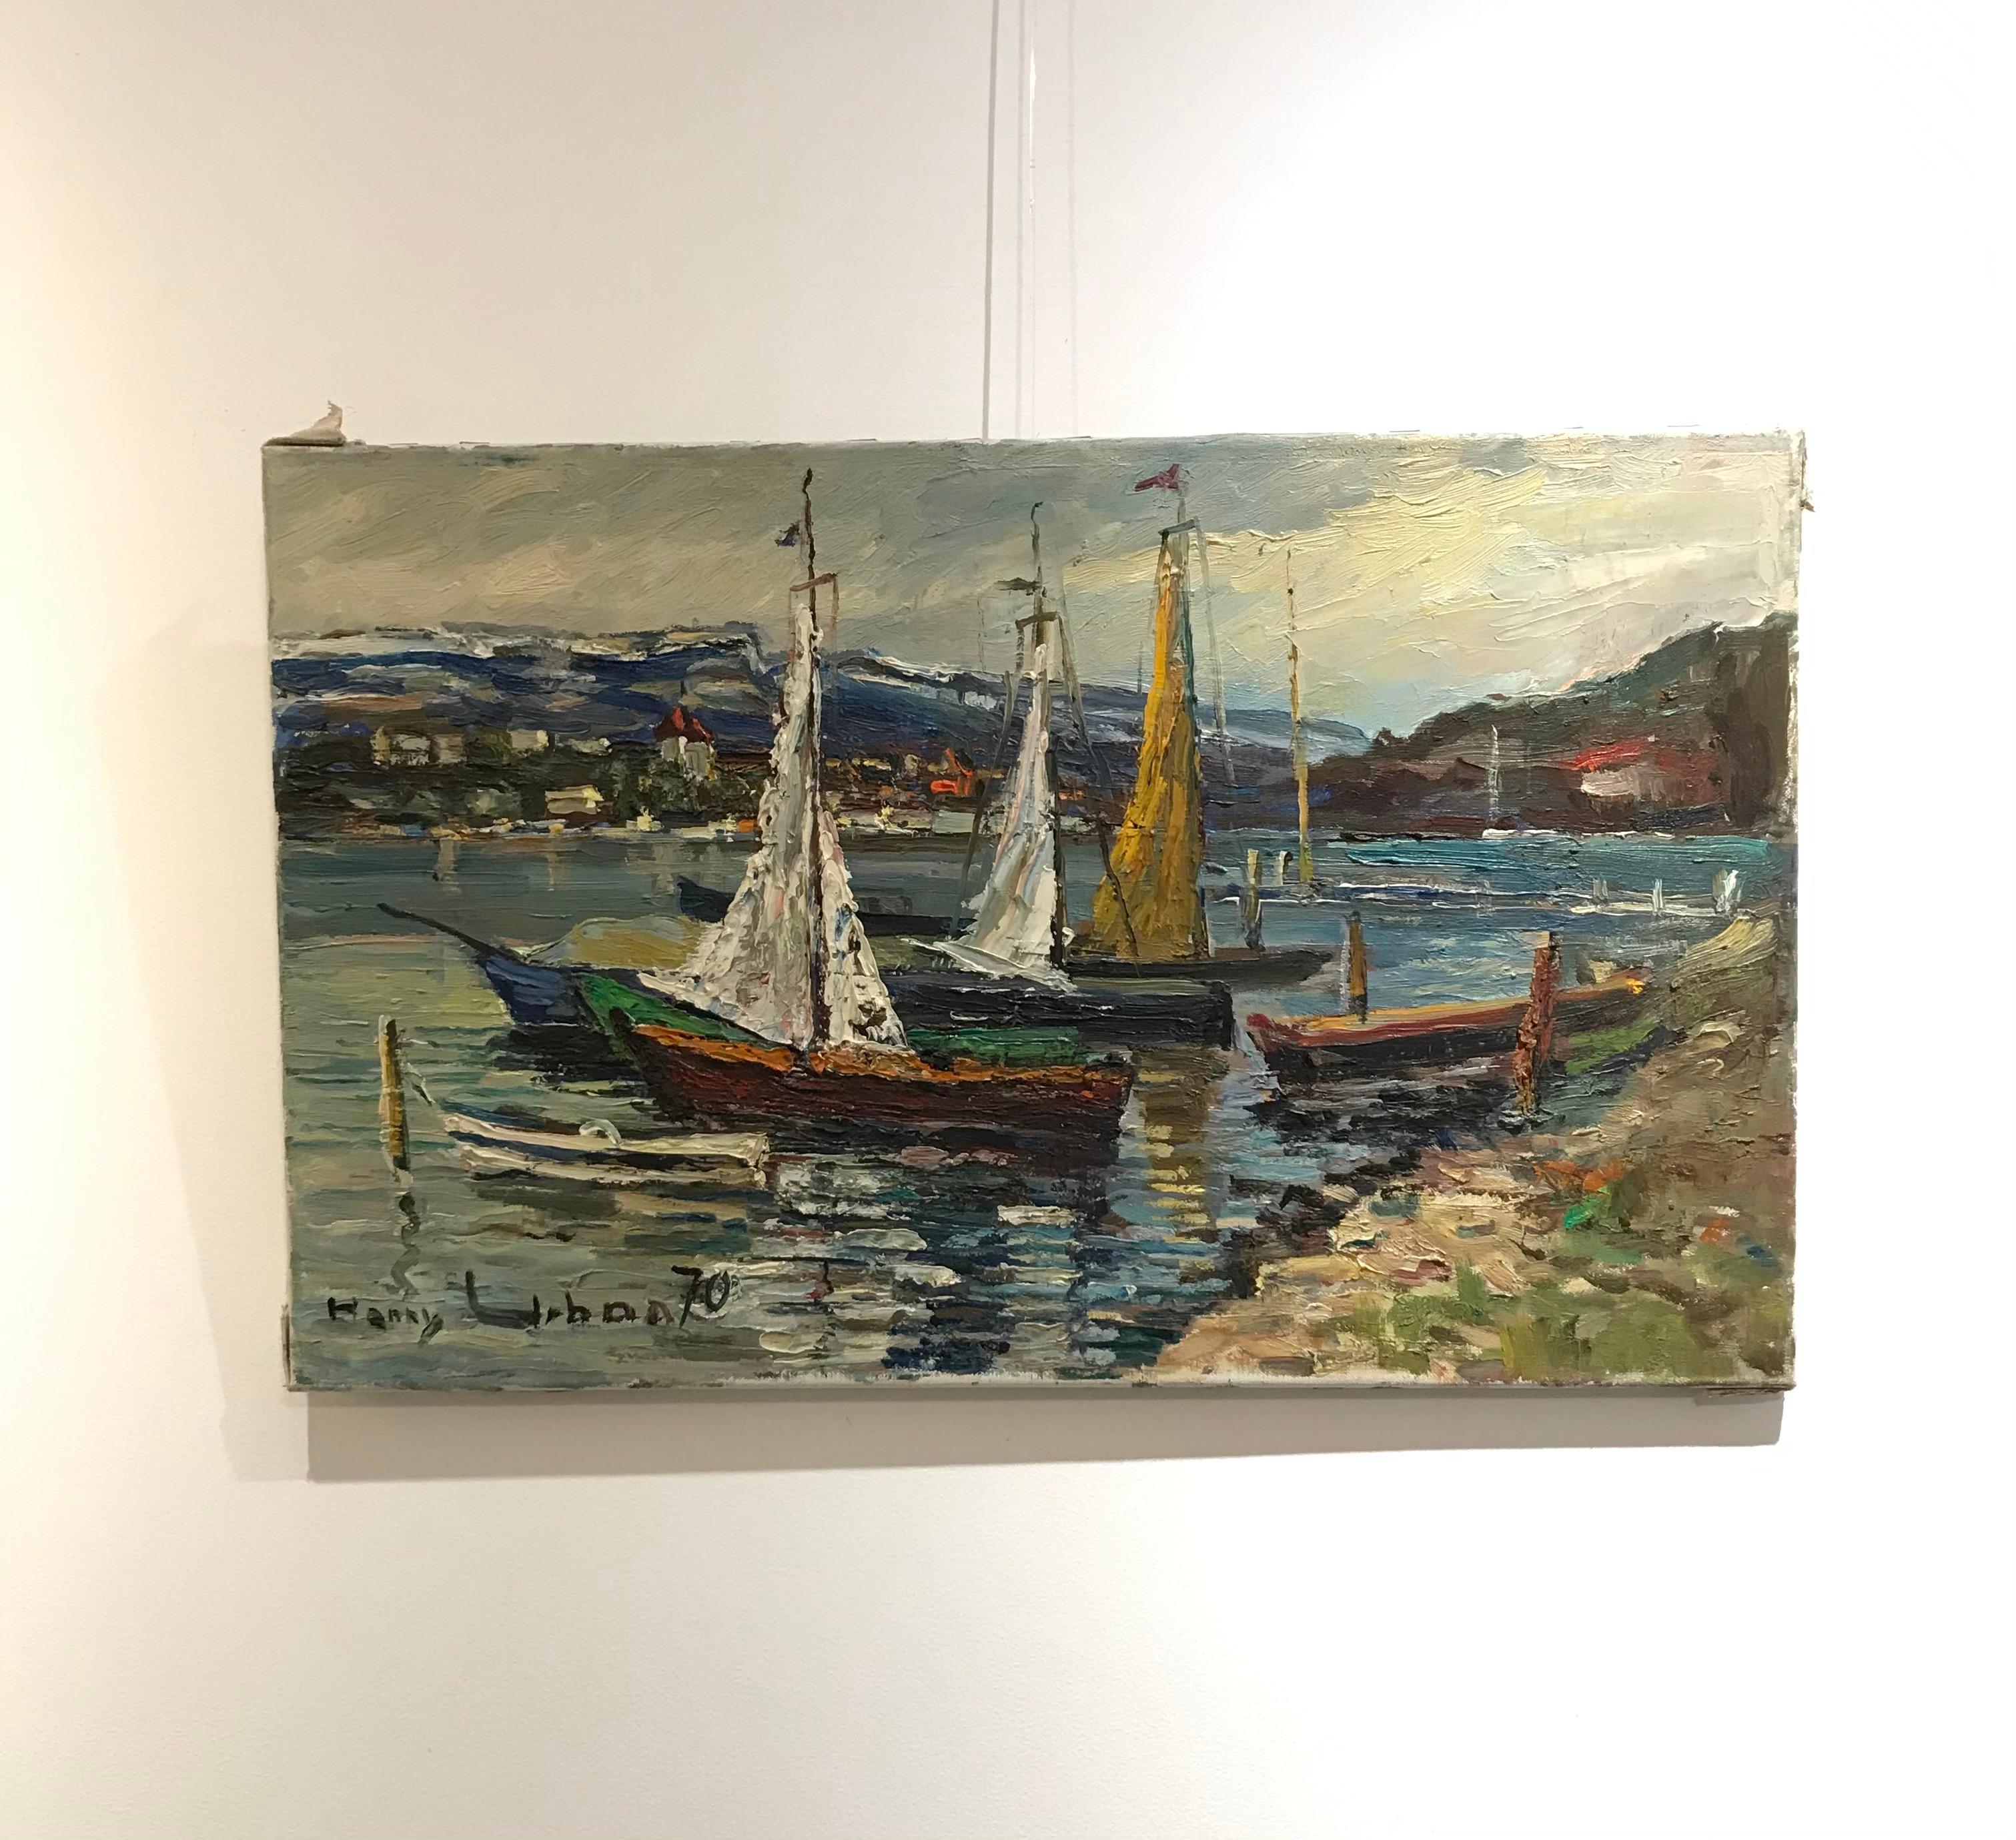 Sailboats by the lake - Painting by Harry Urban